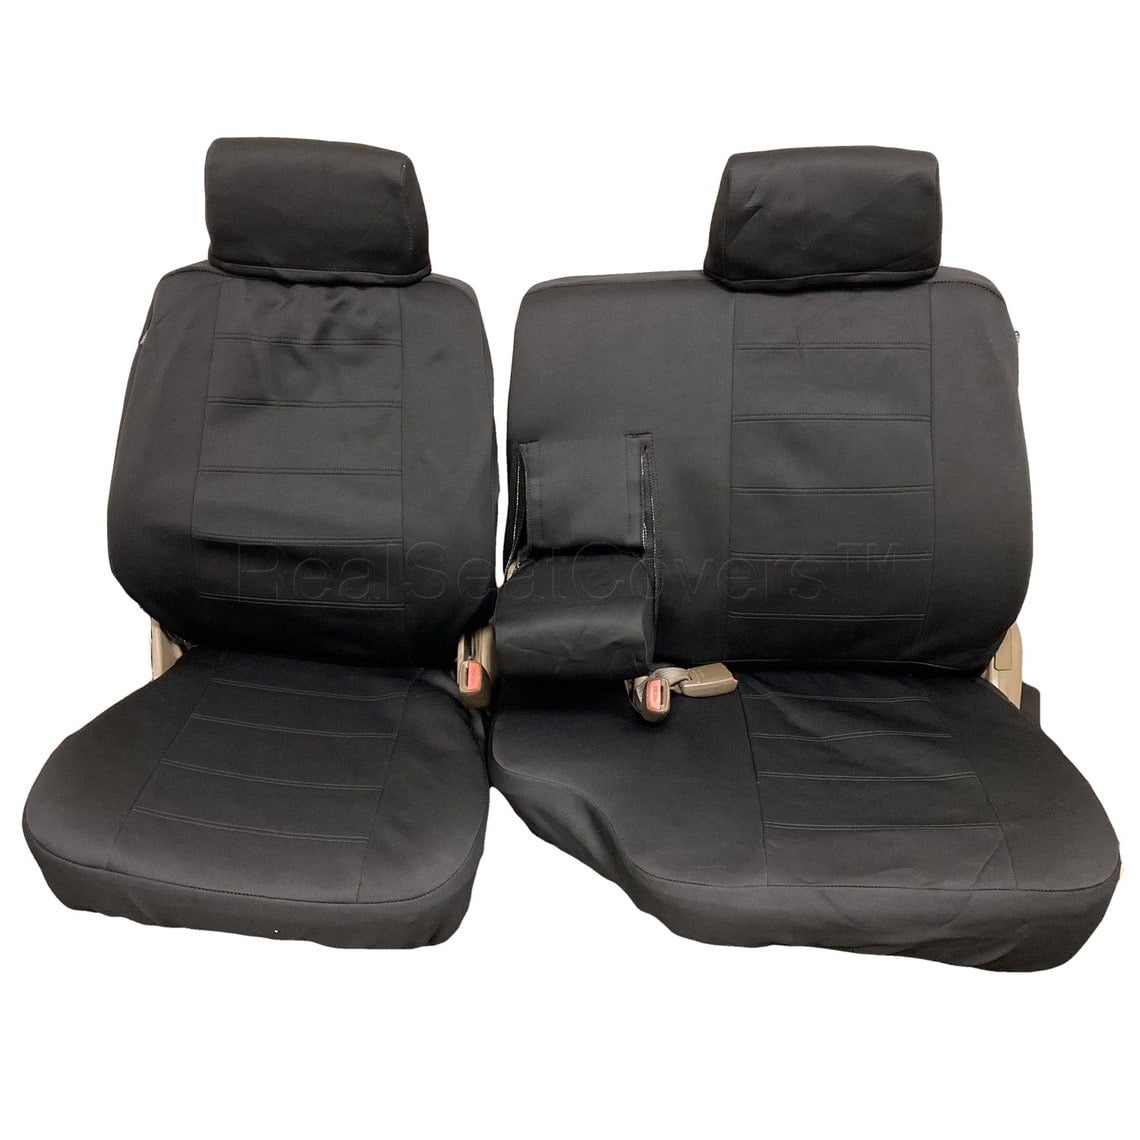 100% Waterproof Neoprene cover for toyota tacoma rcab xcab front 60/40 split bench (Black) - Walmart.com